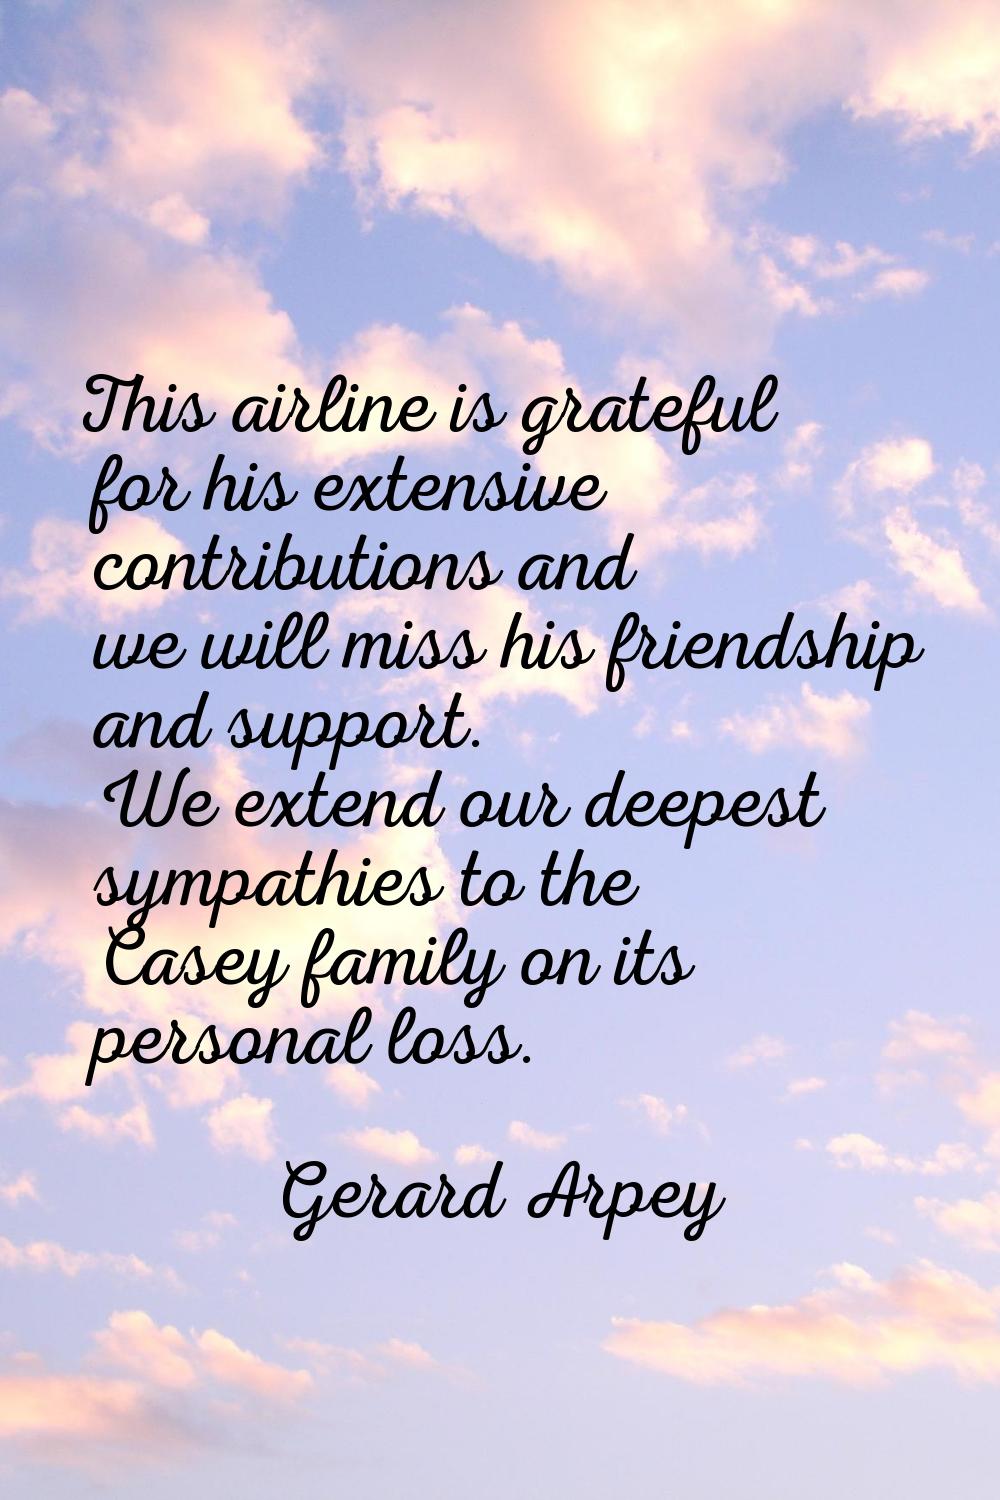 This airline is grateful for his extensive contributions and we will miss his friendship and suppor